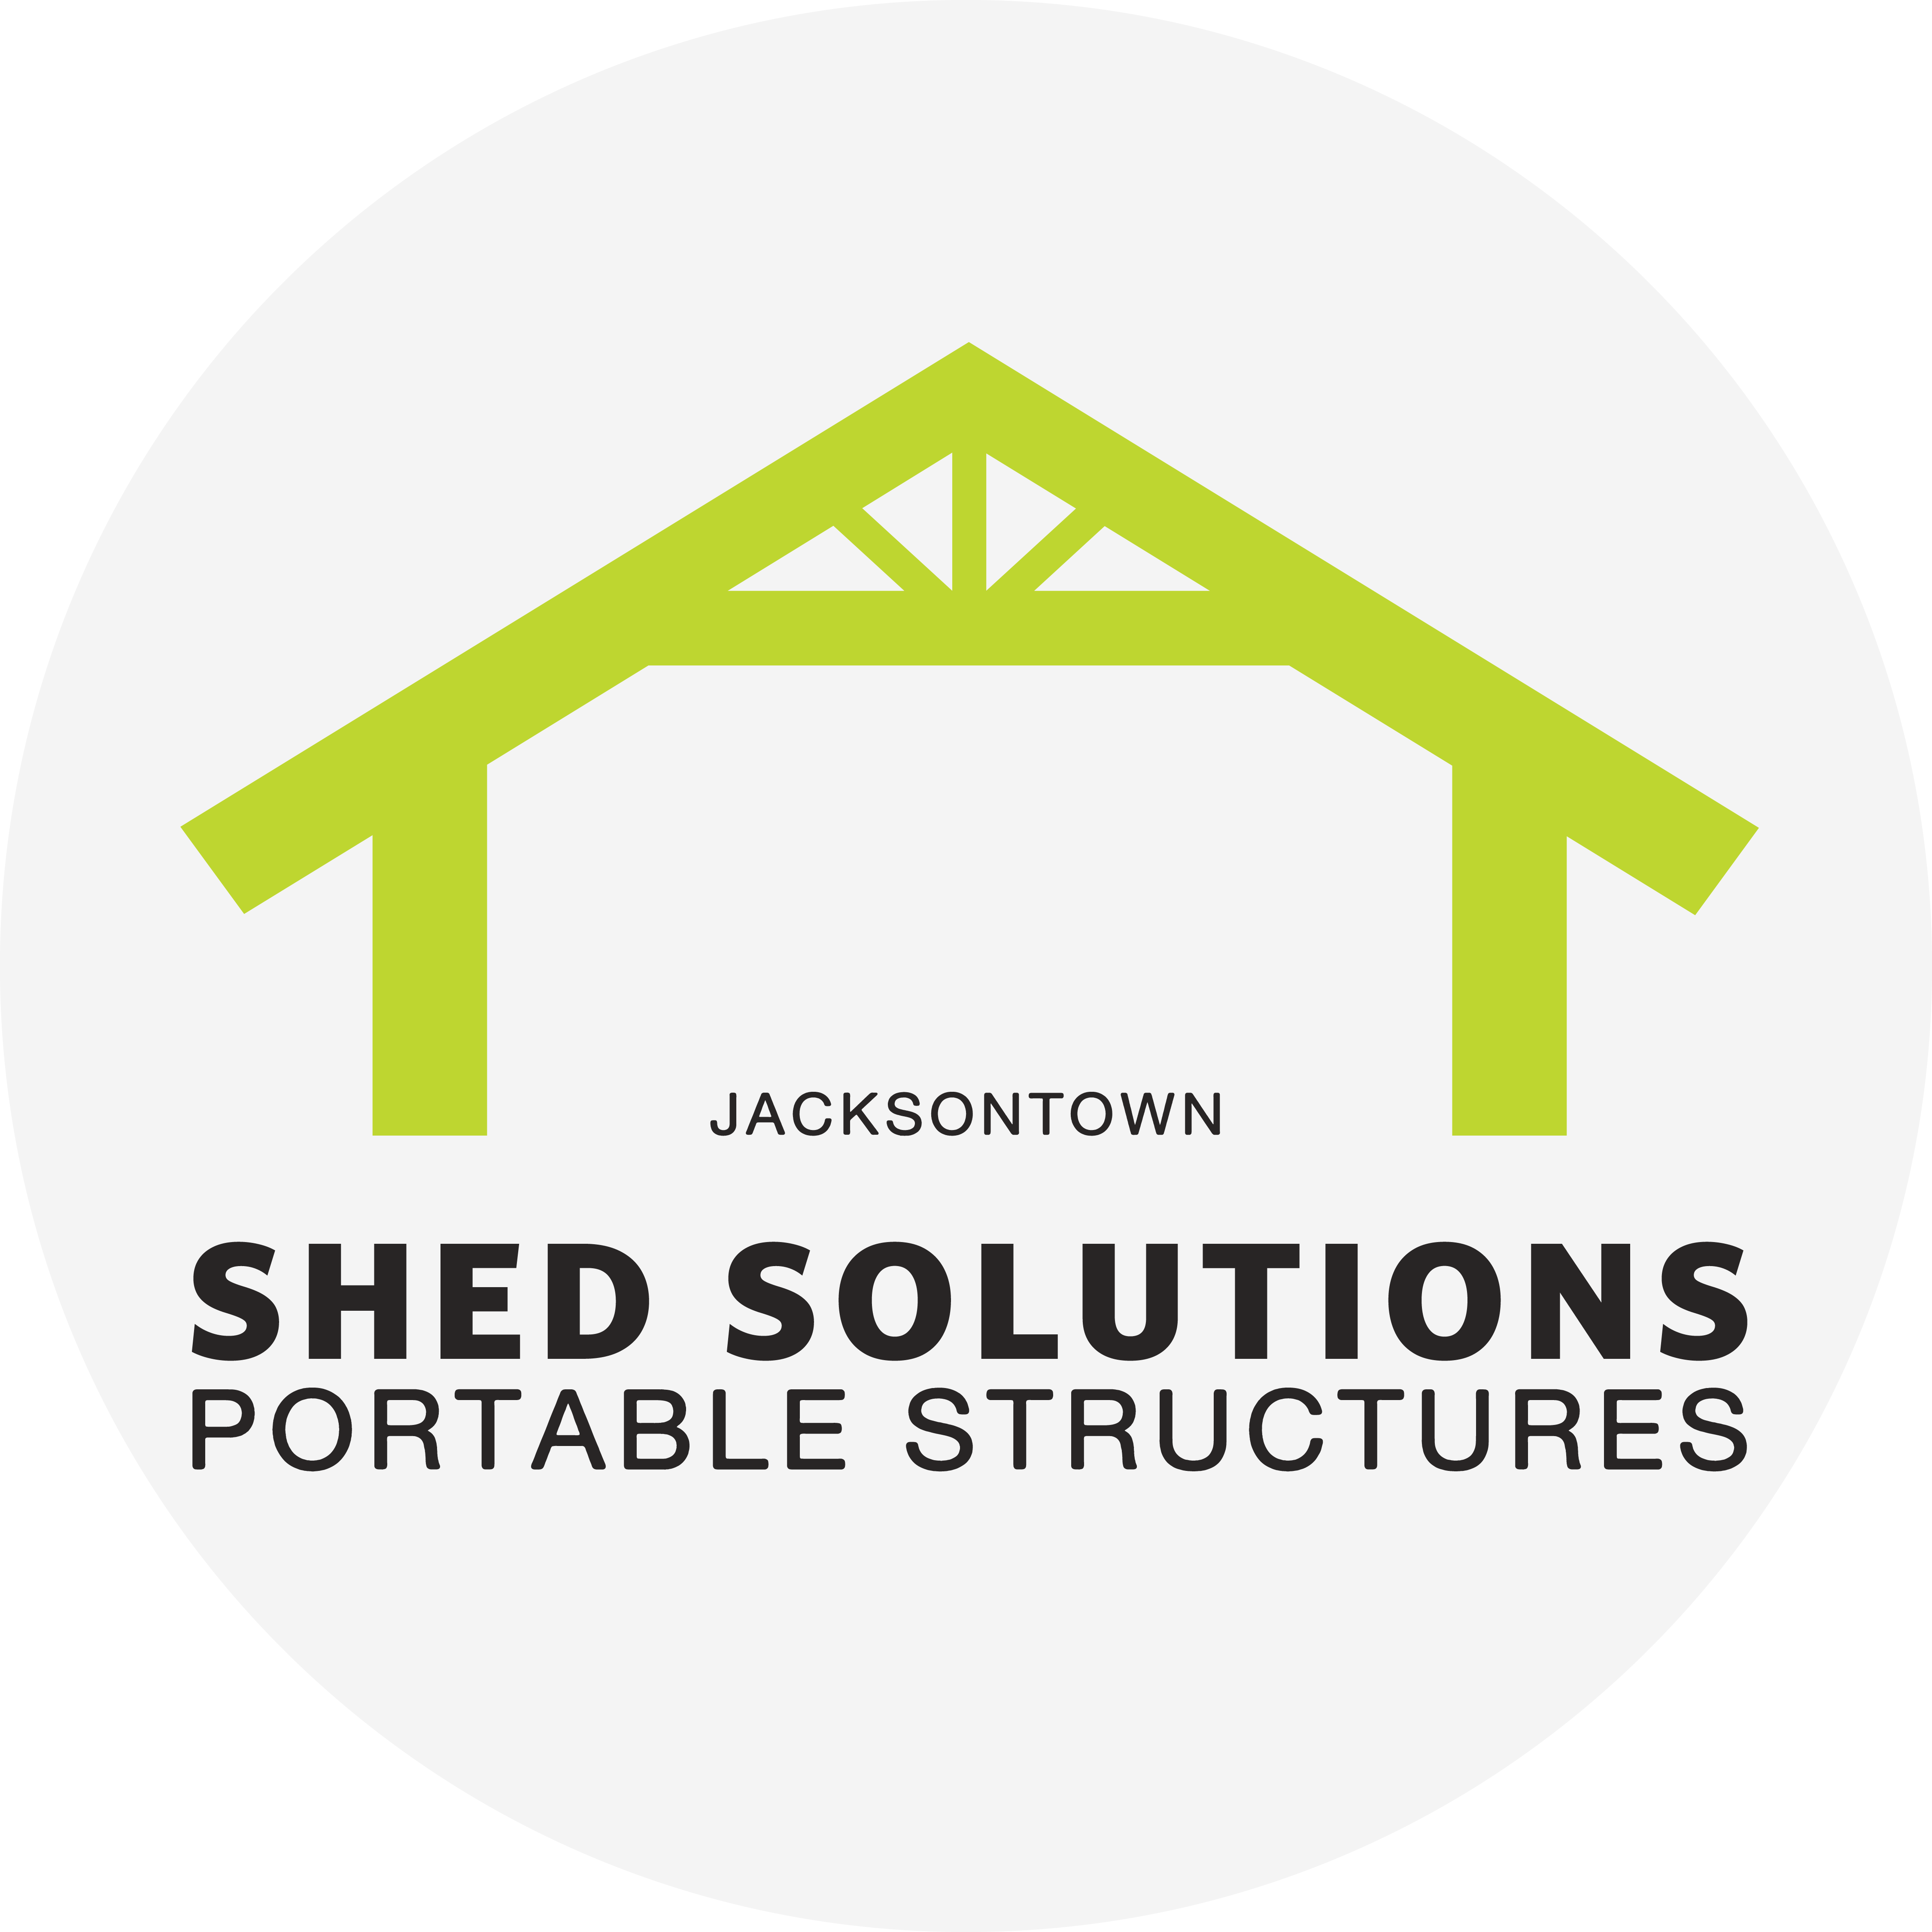 Ohio Shed Solutions of Jacksontown Logo